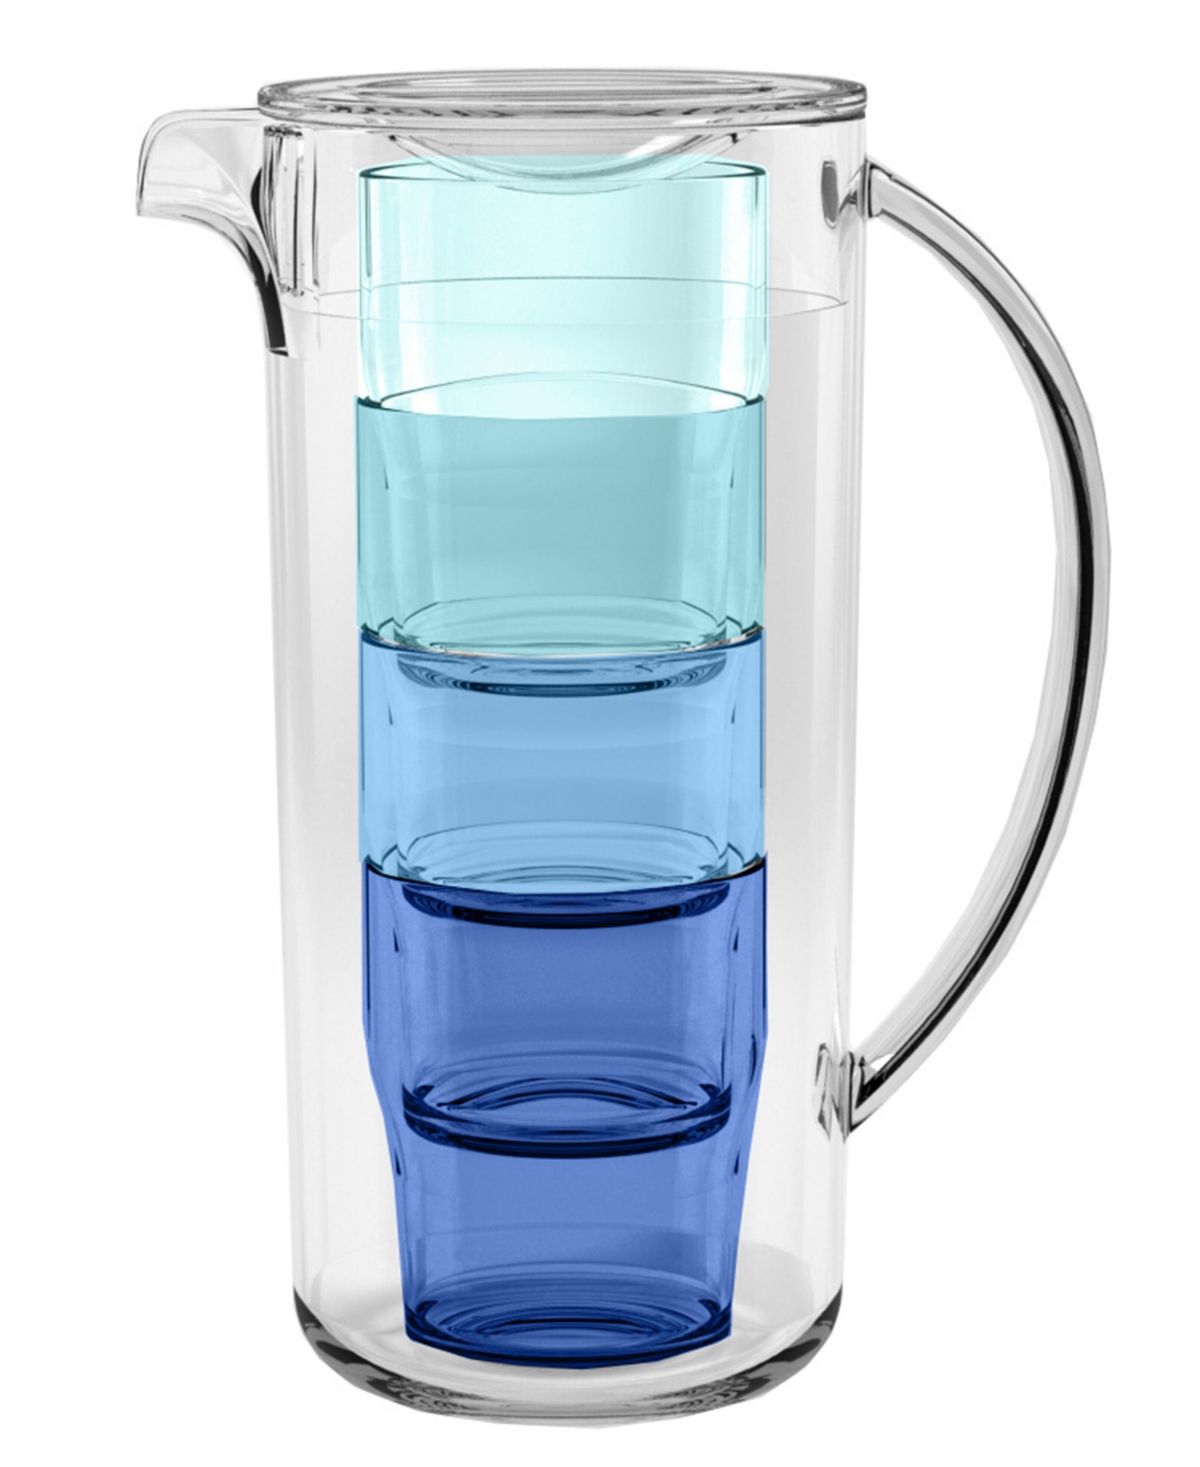 Simple Stacked Nested Pitcher Set with 4 Assorted Color Glasses, 91 oz., Premium Plastic, 5 Piece Set - White Blue